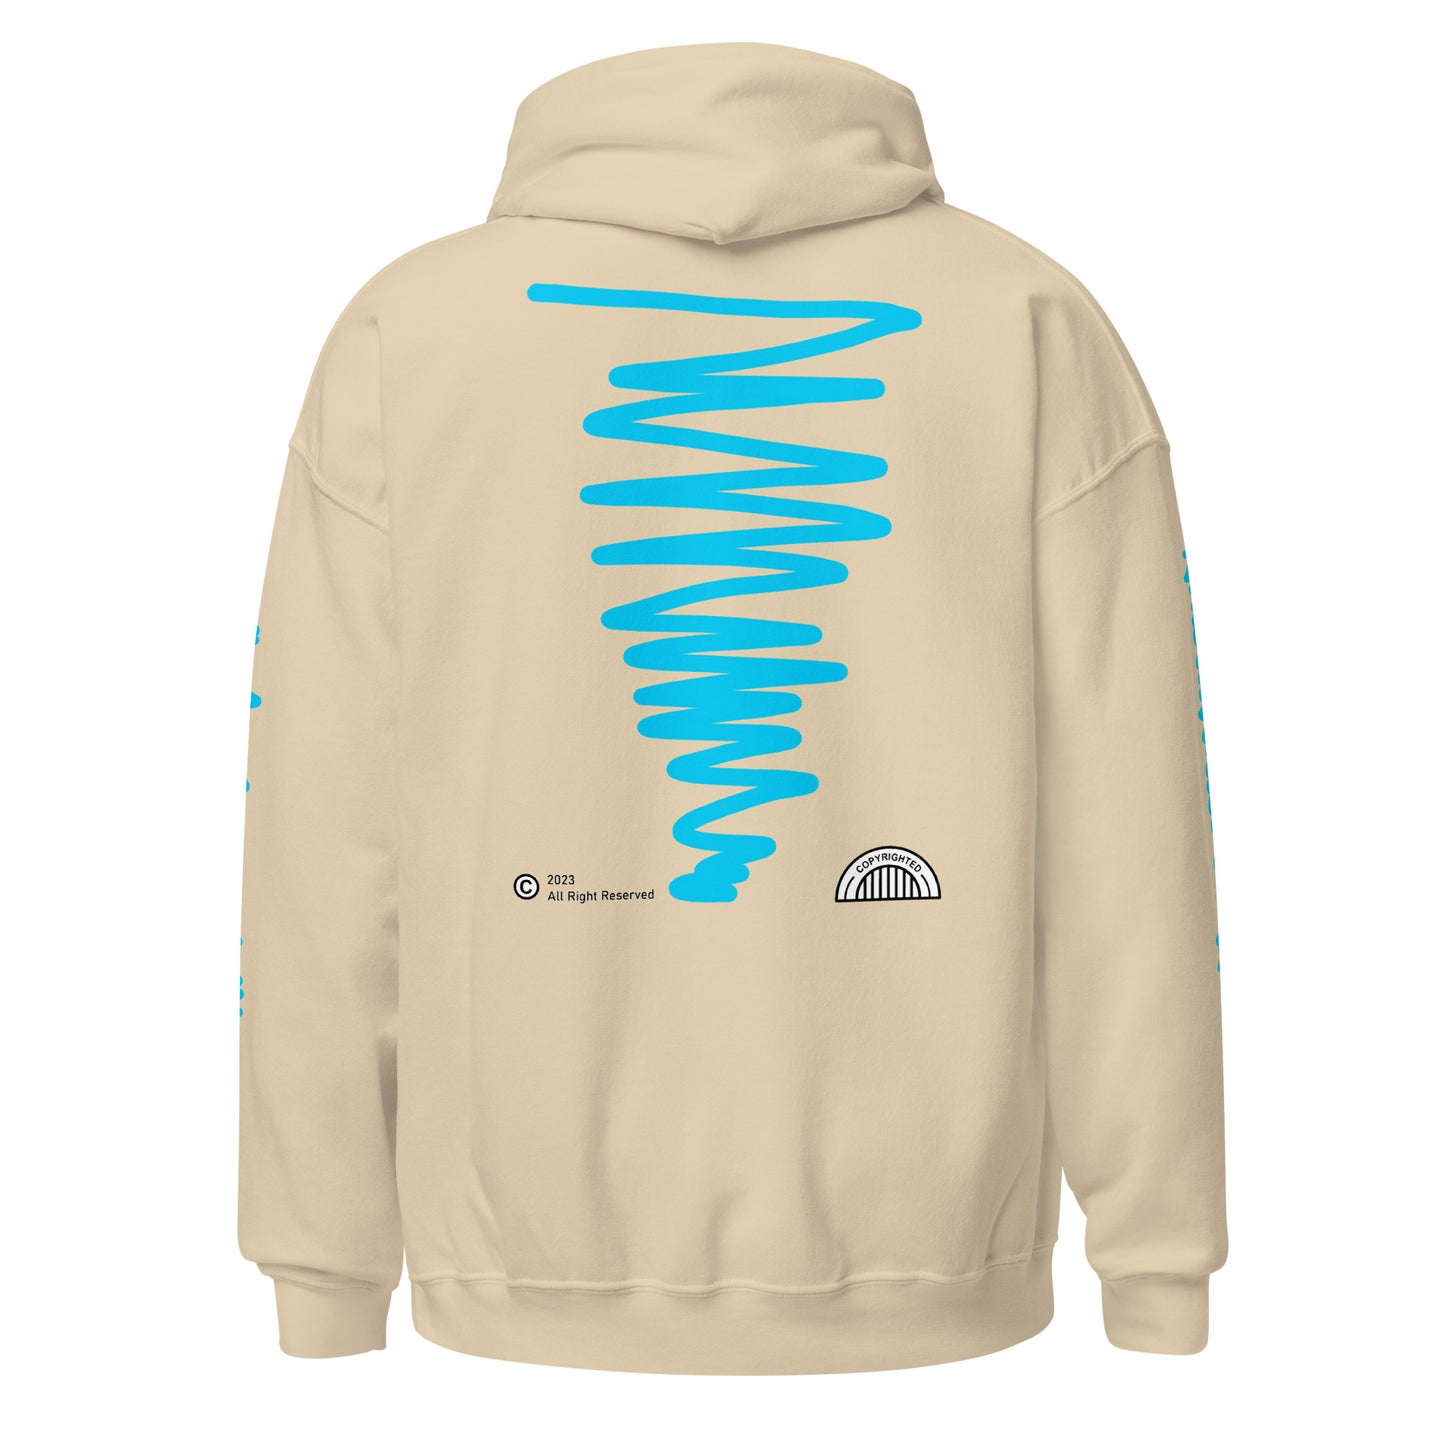 Heavy Blend Hoodie with Happiness Symbol